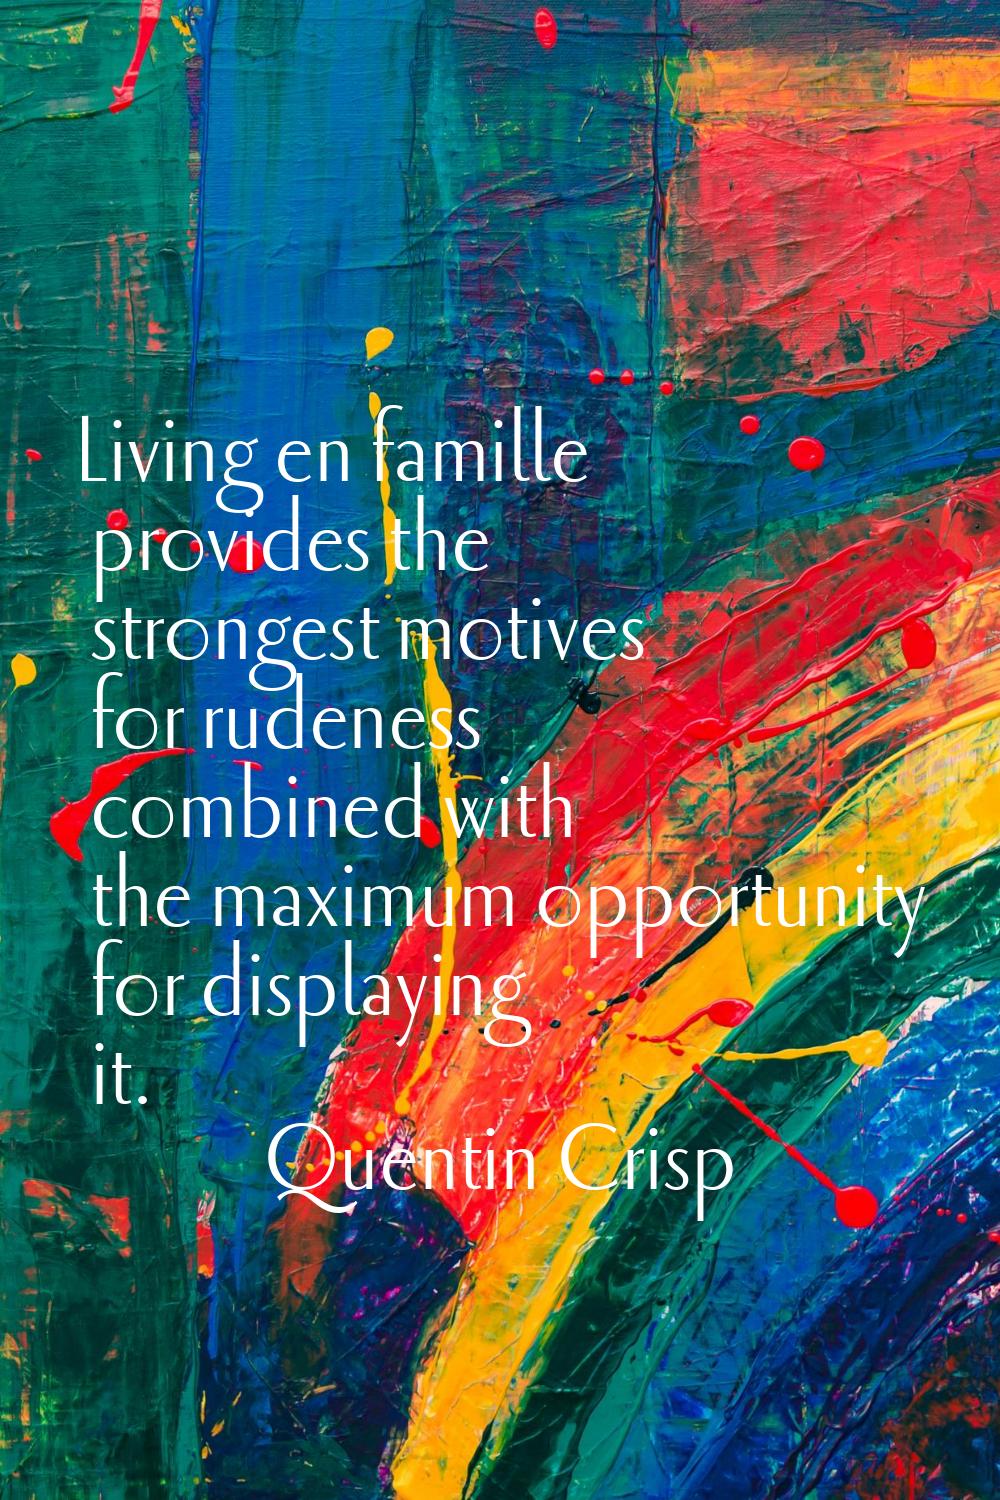 Living en famille provides the strongest motives for rudeness combined with the maximum opportunity